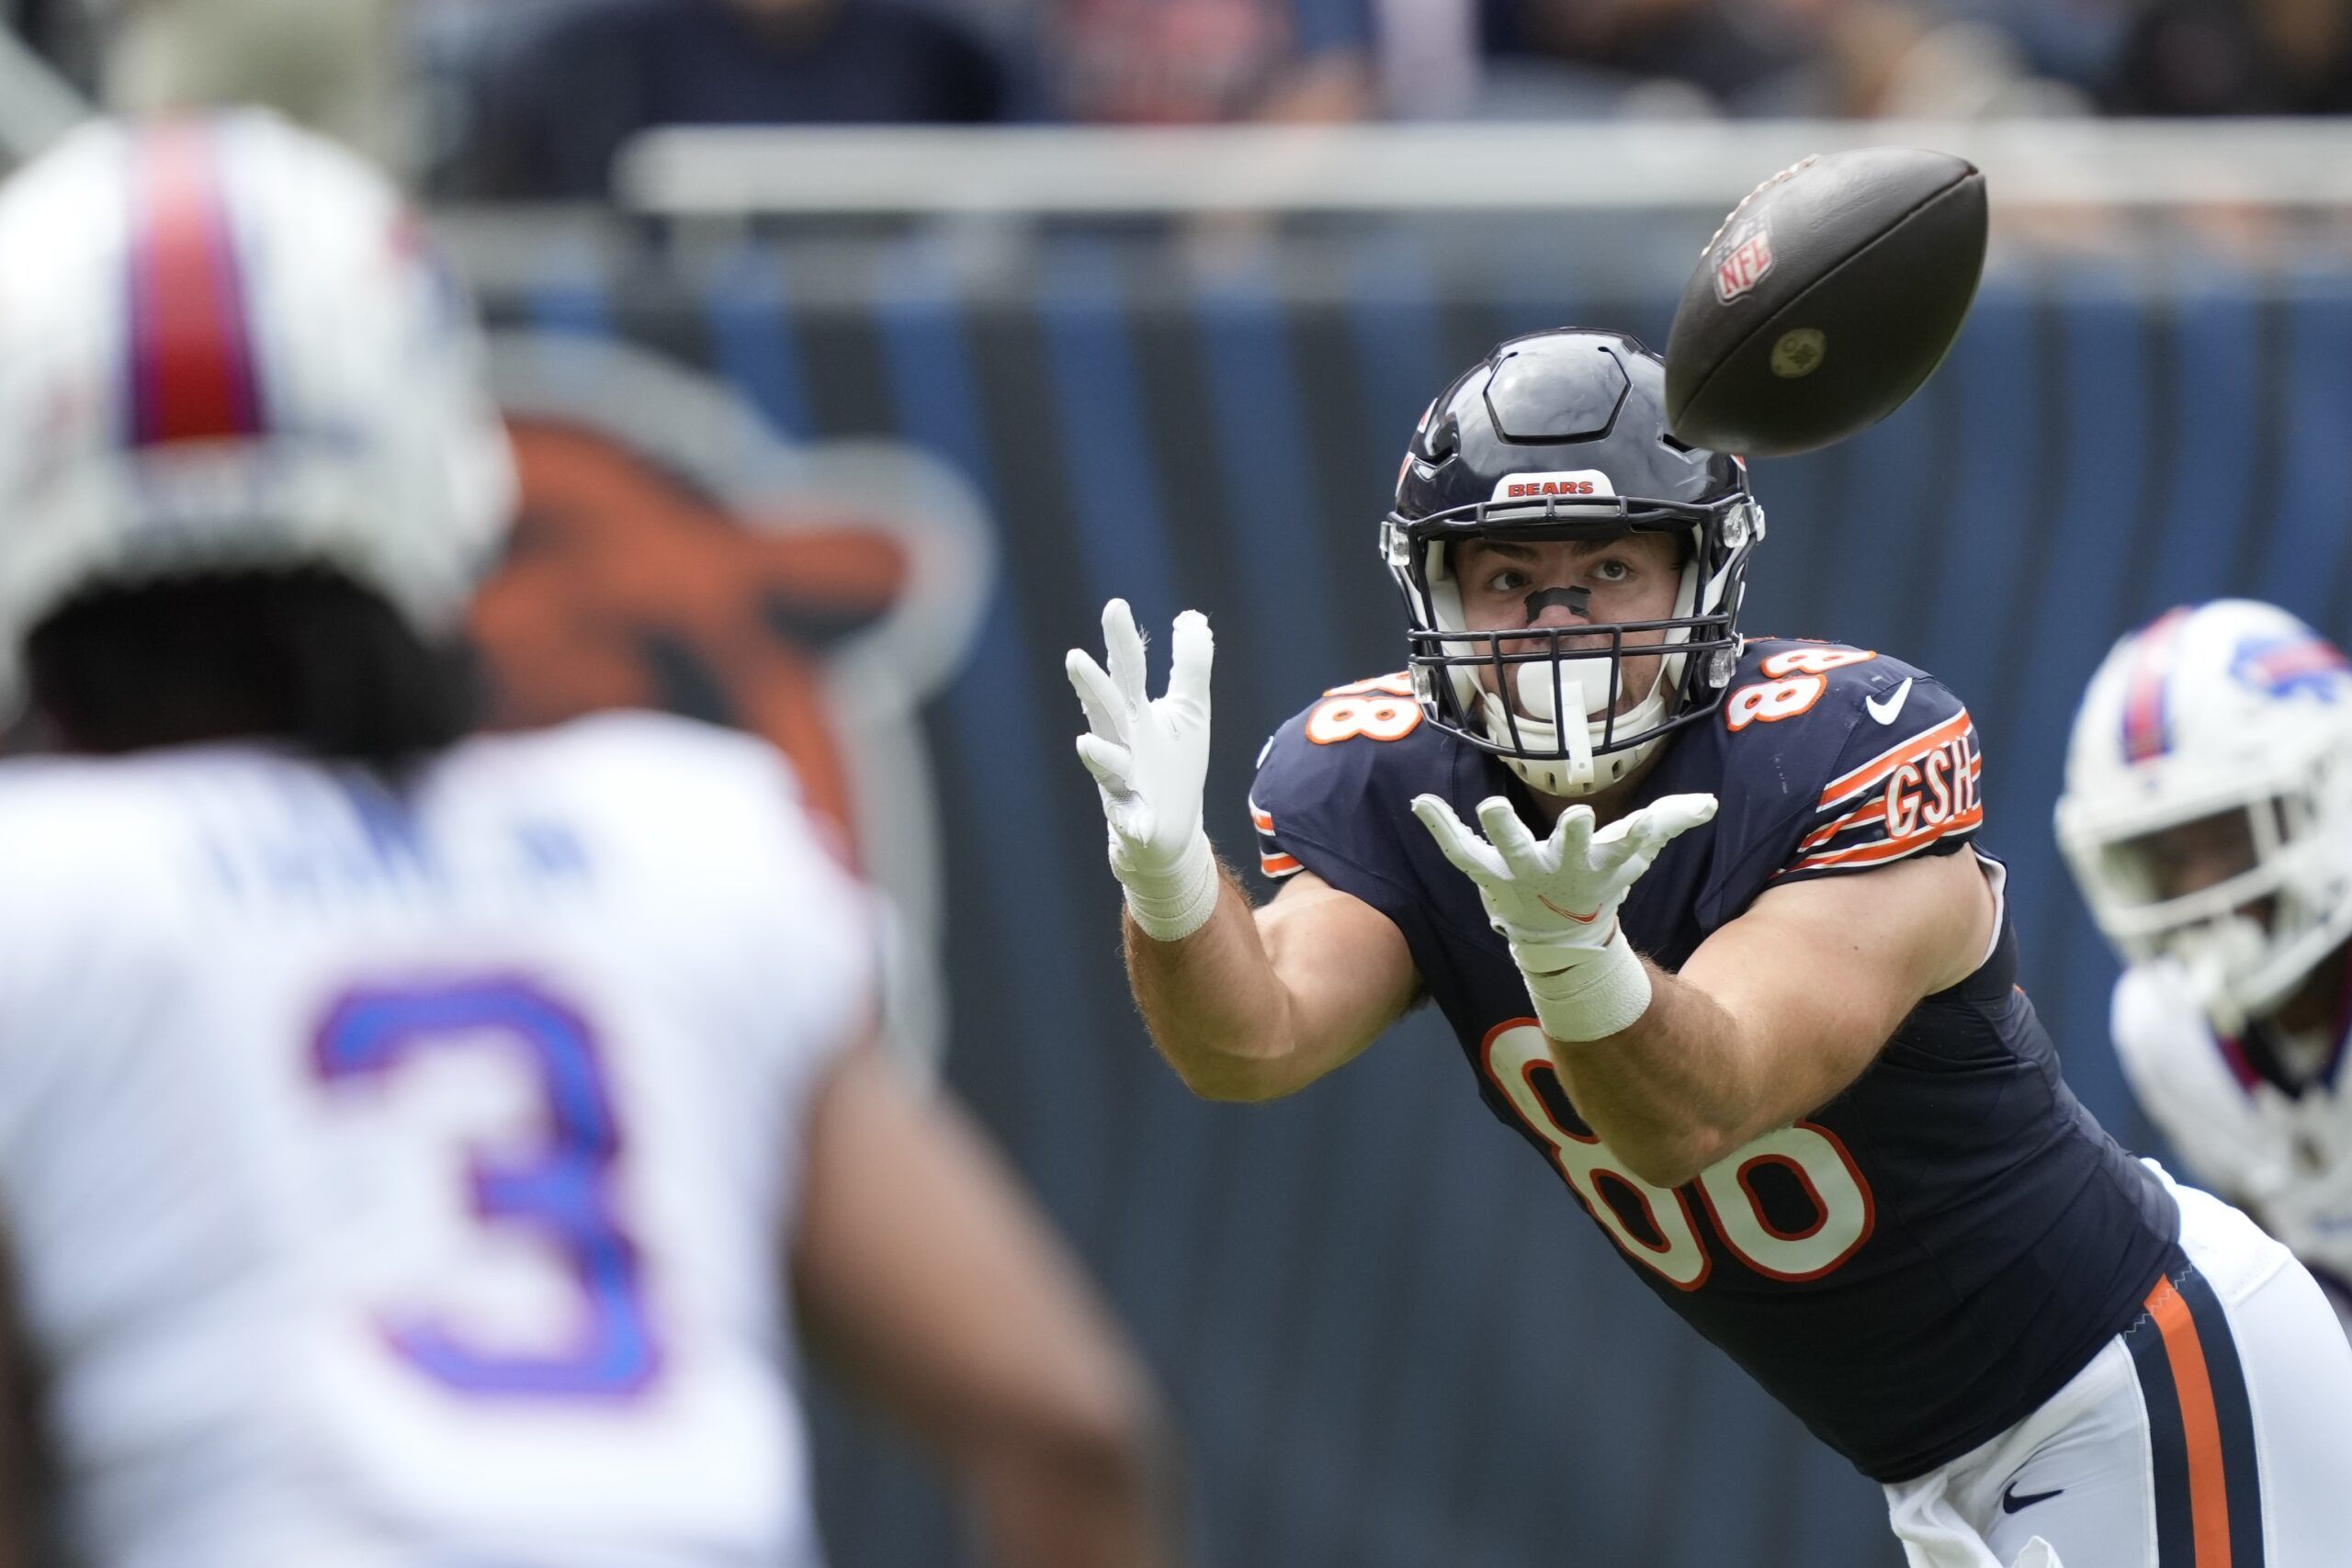 Bears vs. Bills: Everything we know about Chicago's…